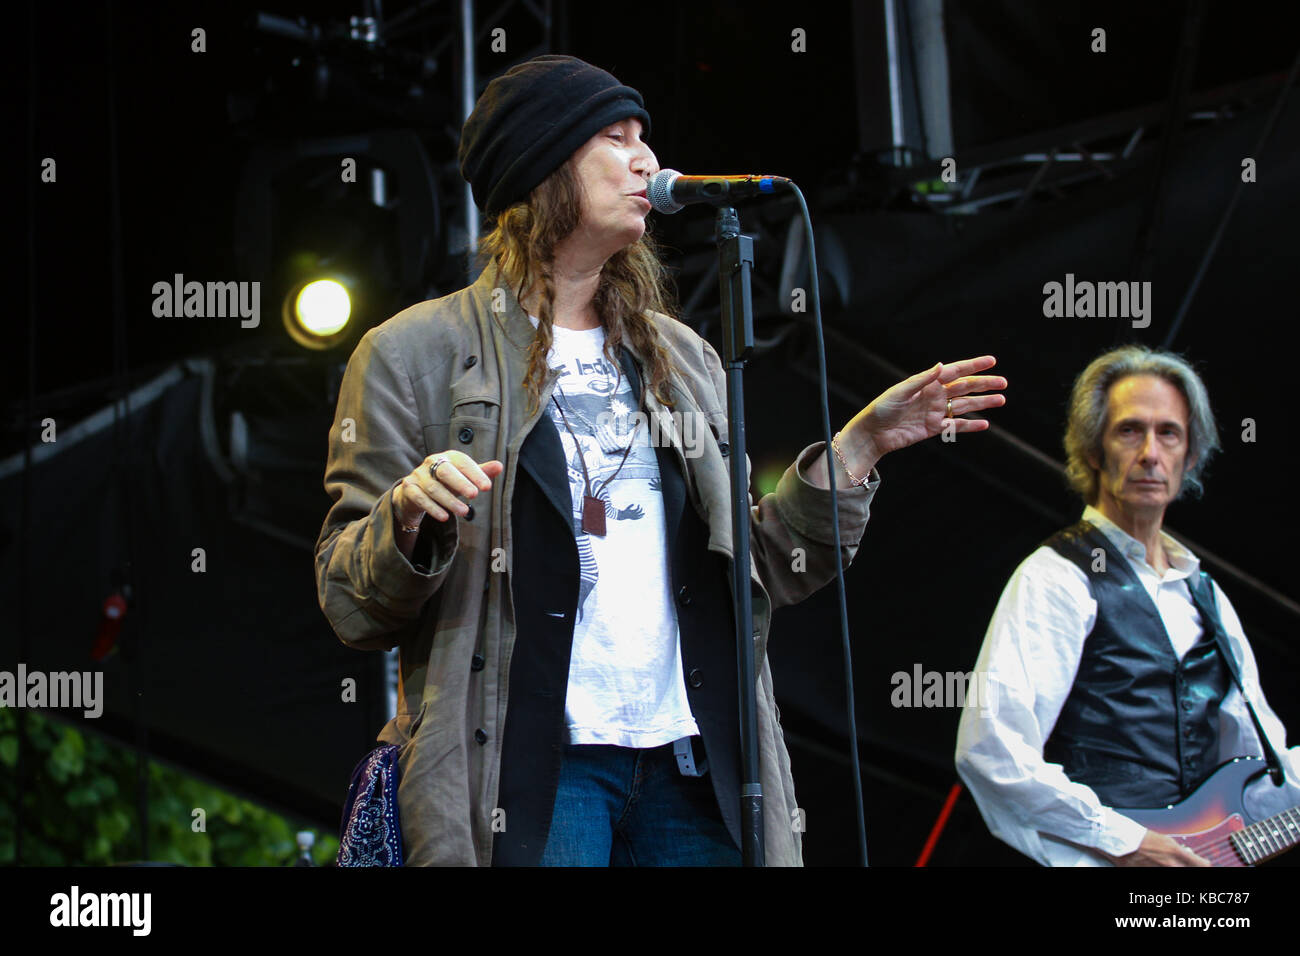 The American singer, songwriter and poet Patti Smith performs a live concert at the Norwegian music festival Bergenfest 2012. Norway, 23/06 2012. Stock Photo